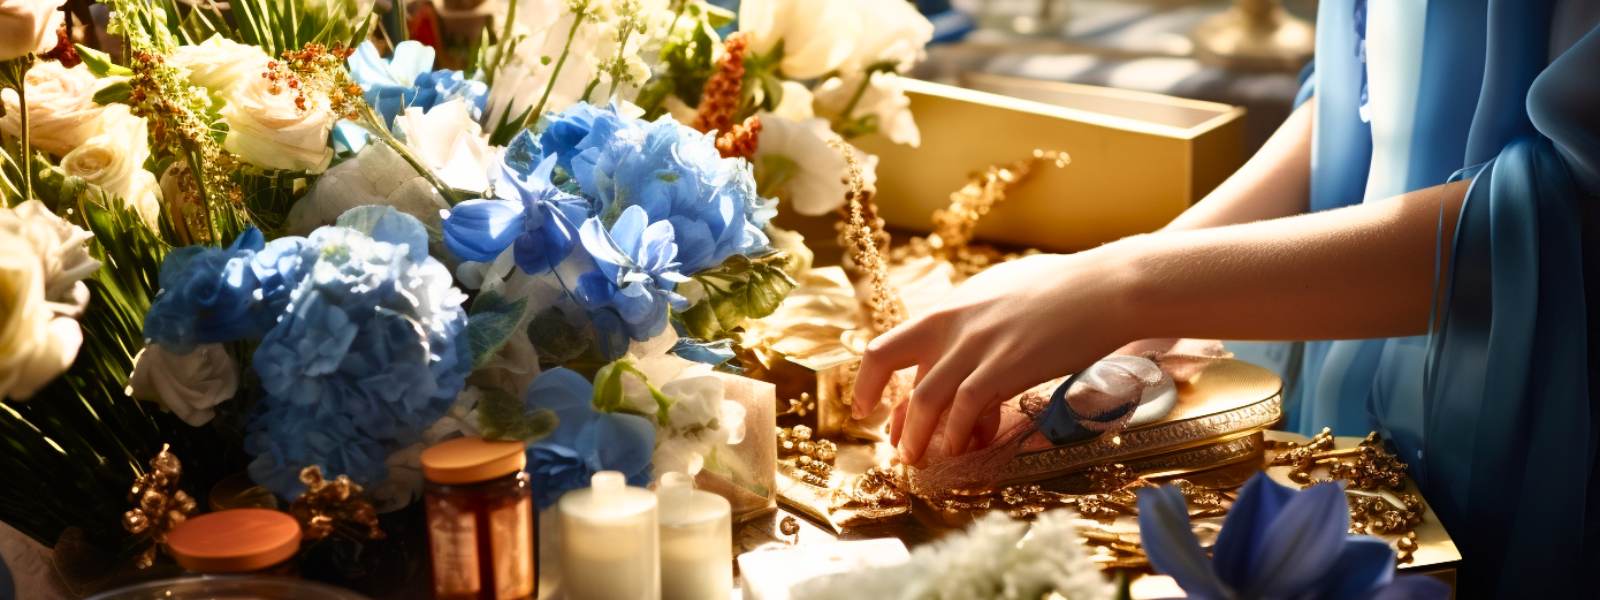 Buy Gift Boxes for Men and Gifts for Women, beautiful scene of blue and gold, florists hands creating a gift box - Fabulous Gifts